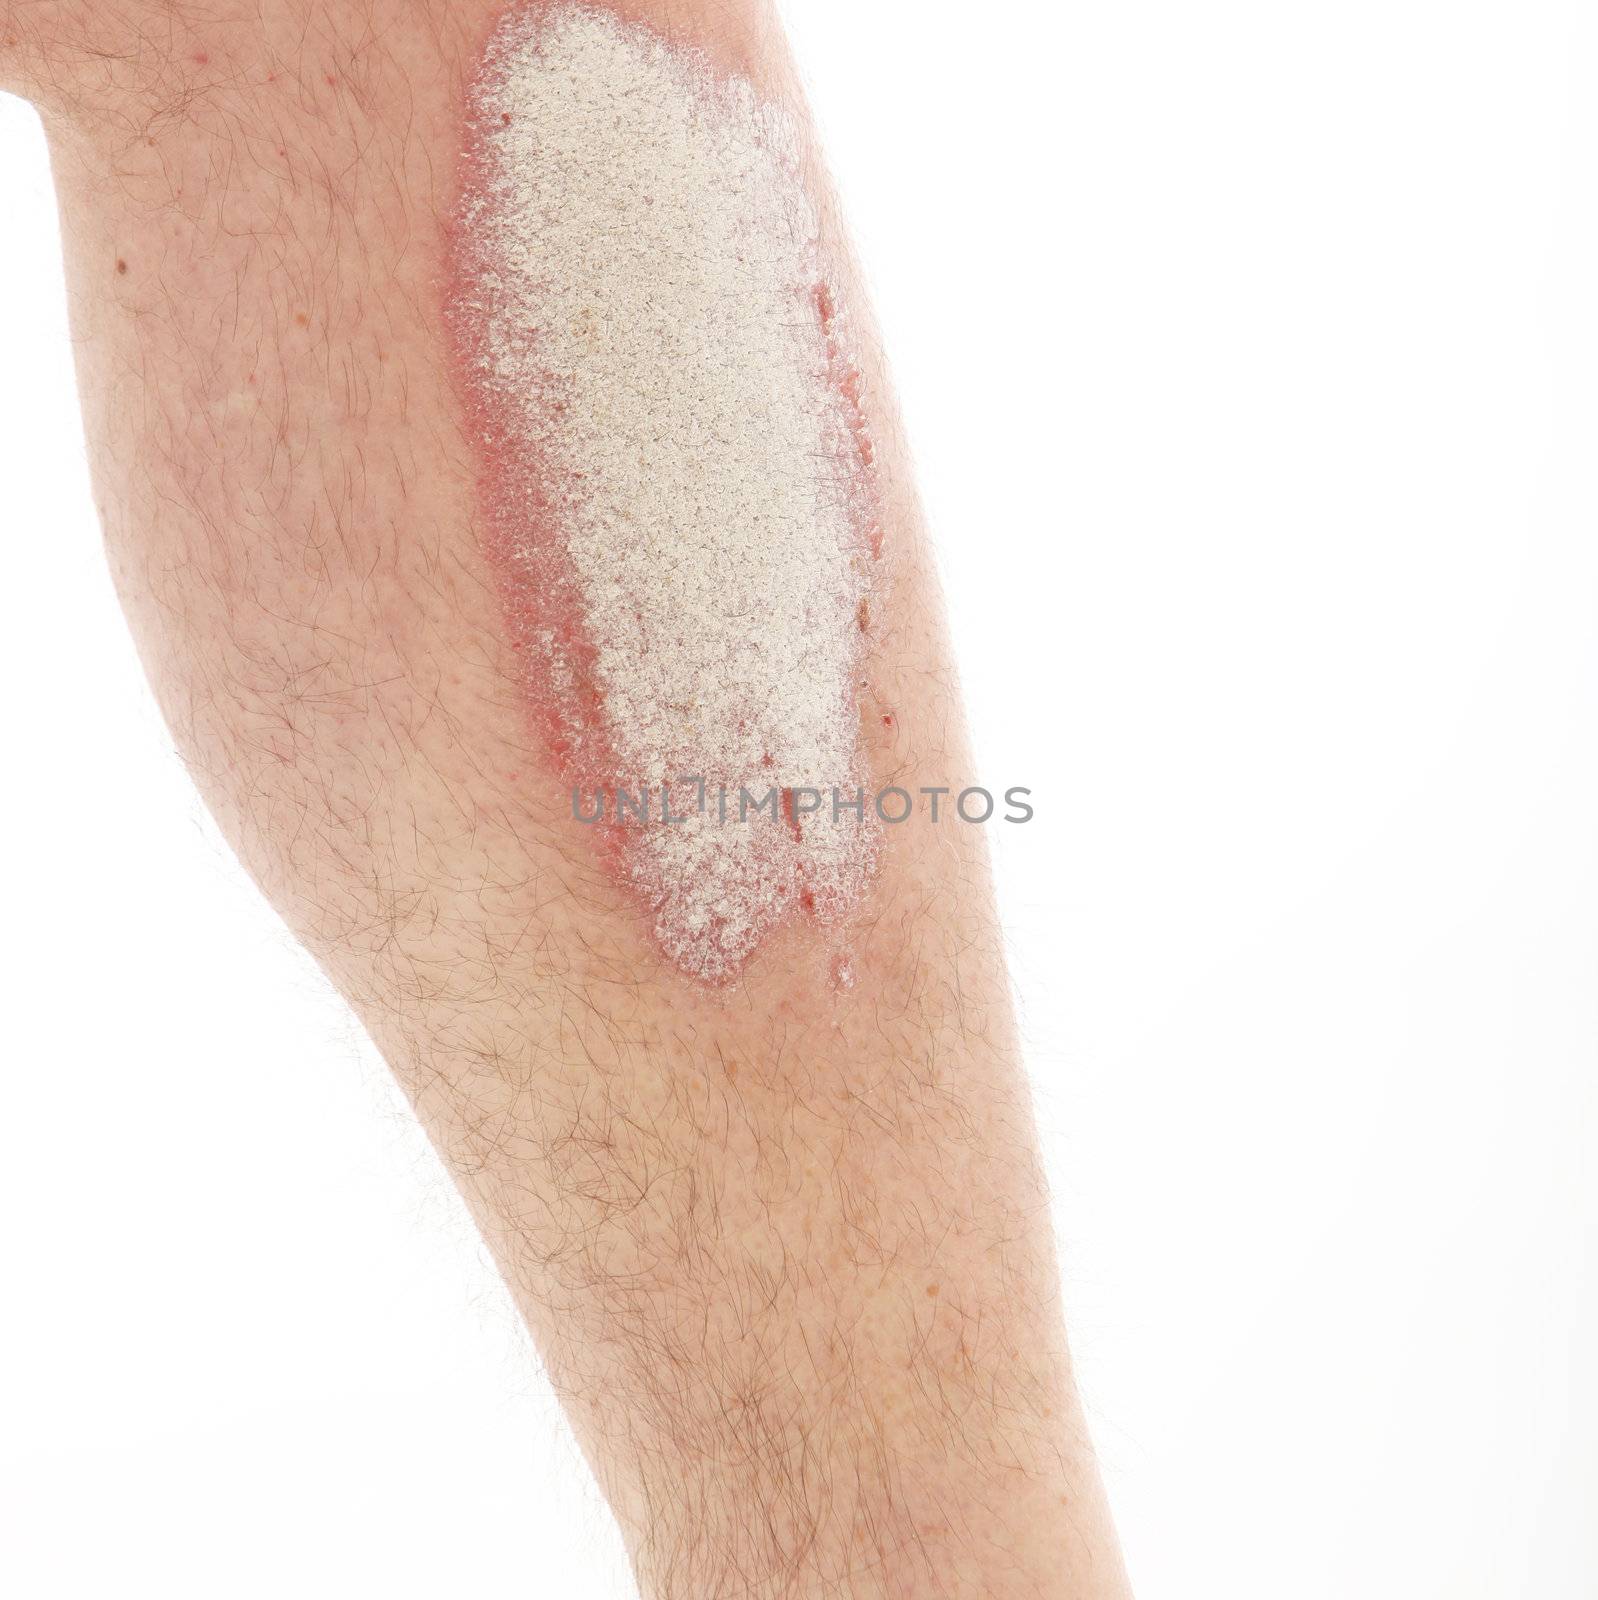 Psoriasis or psoriasis on lower legs - close up by Farina6000